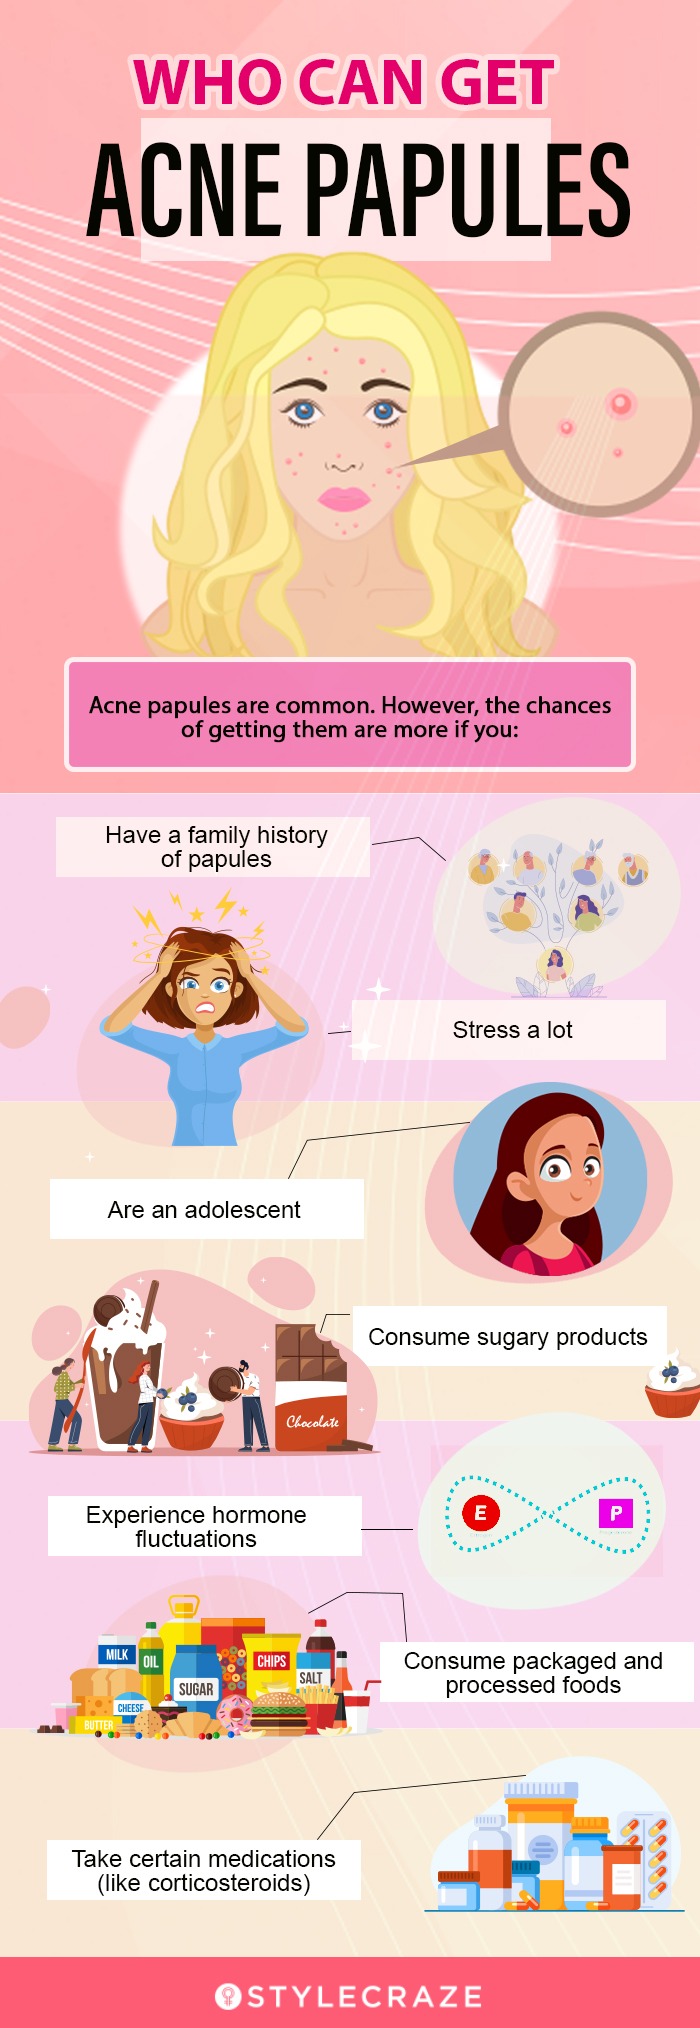 who can get acne papules (infographic)